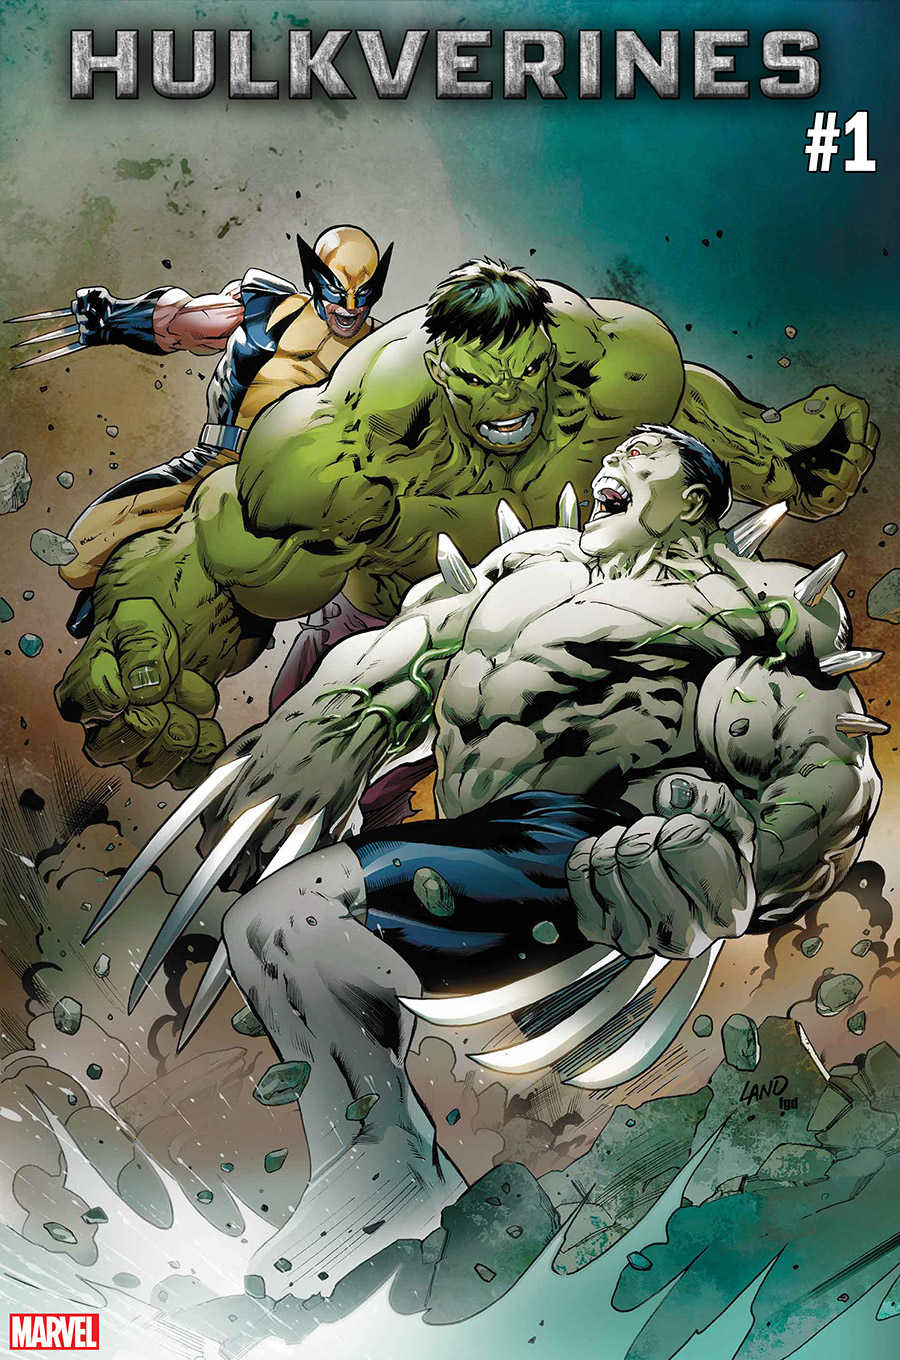 HULKVERINES #1 Cover by GREG LAND